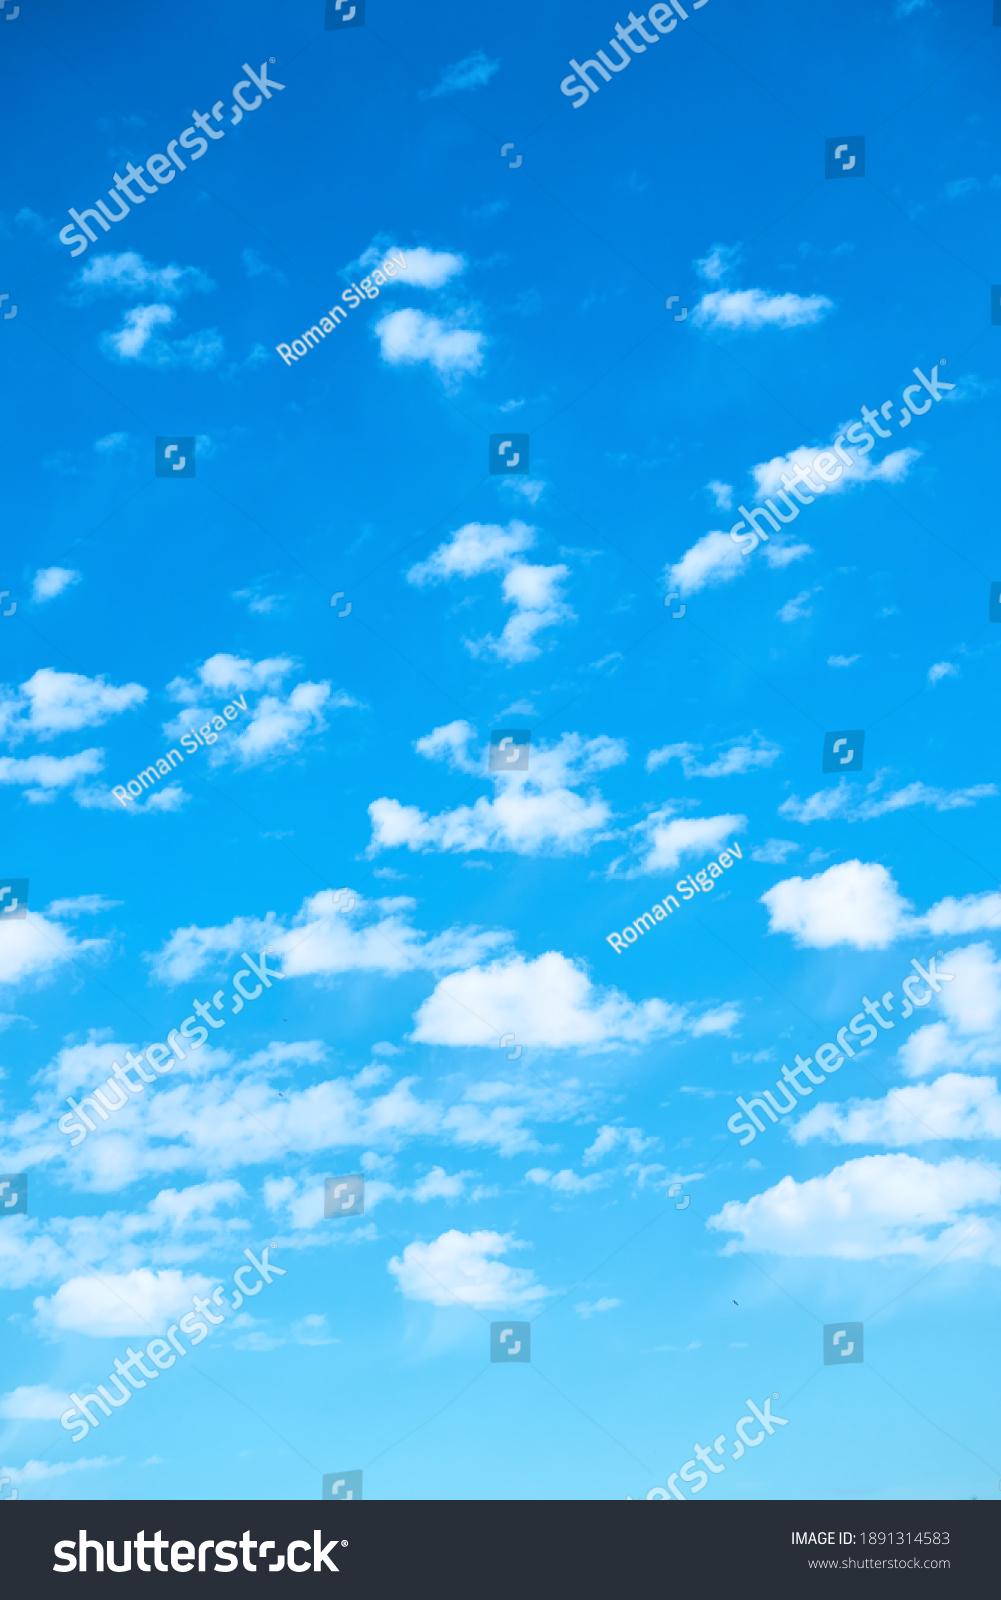 Blue sky with multitude of white clouds - vertical background #1891314583